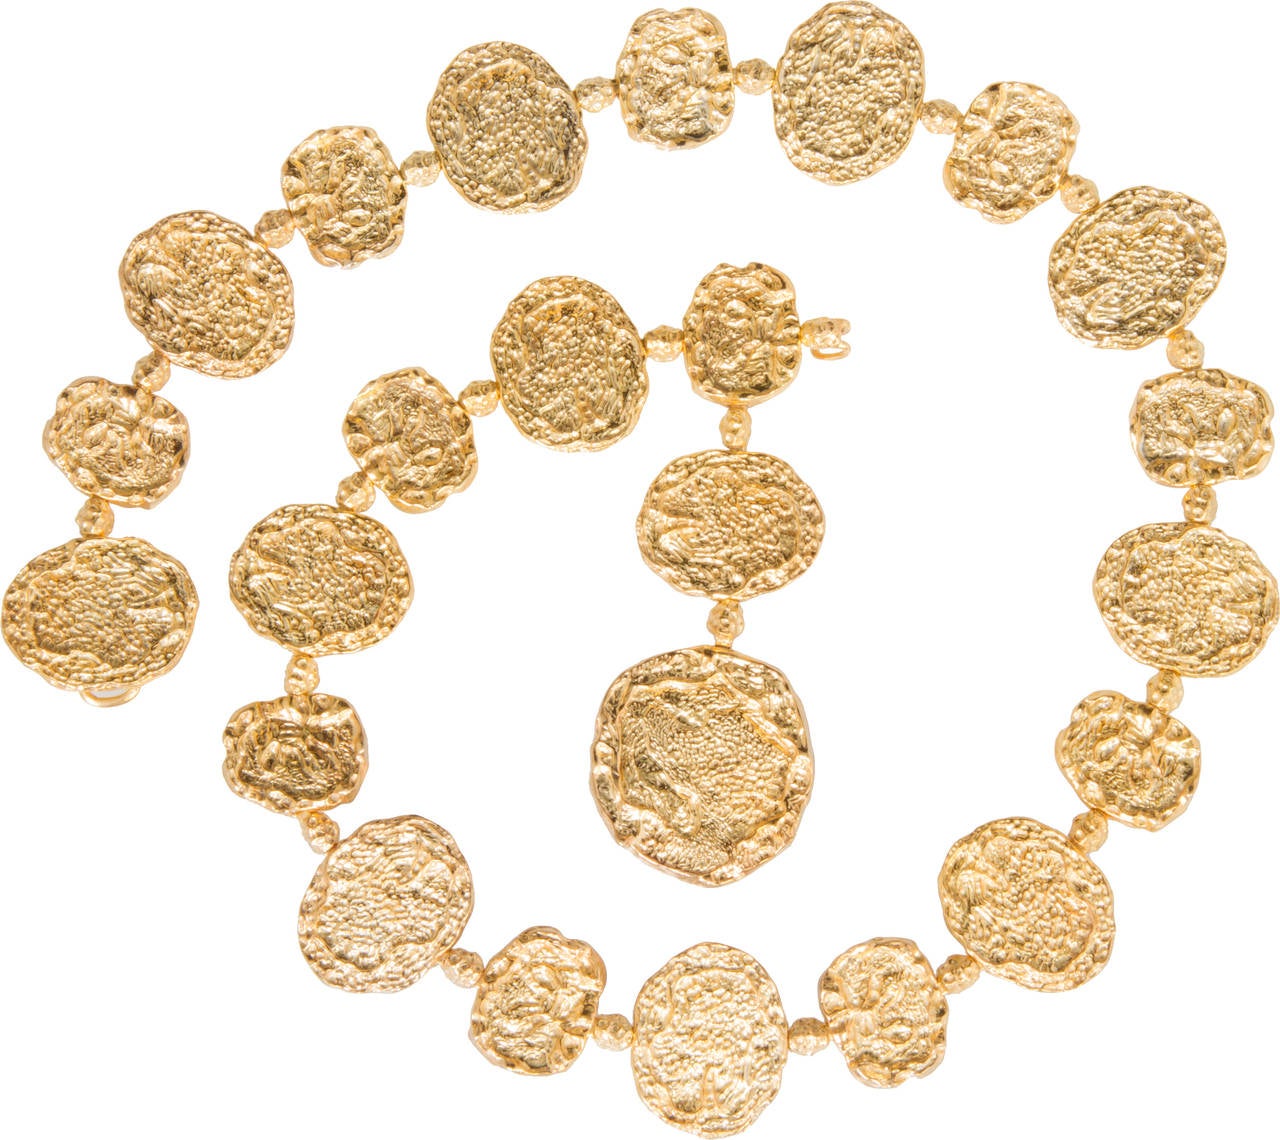 Each element of this Cartier belt is richly textured and has a wonderful gold vermeil finish. This piece can be worn as a belt or necklace. Made for a maximum 33